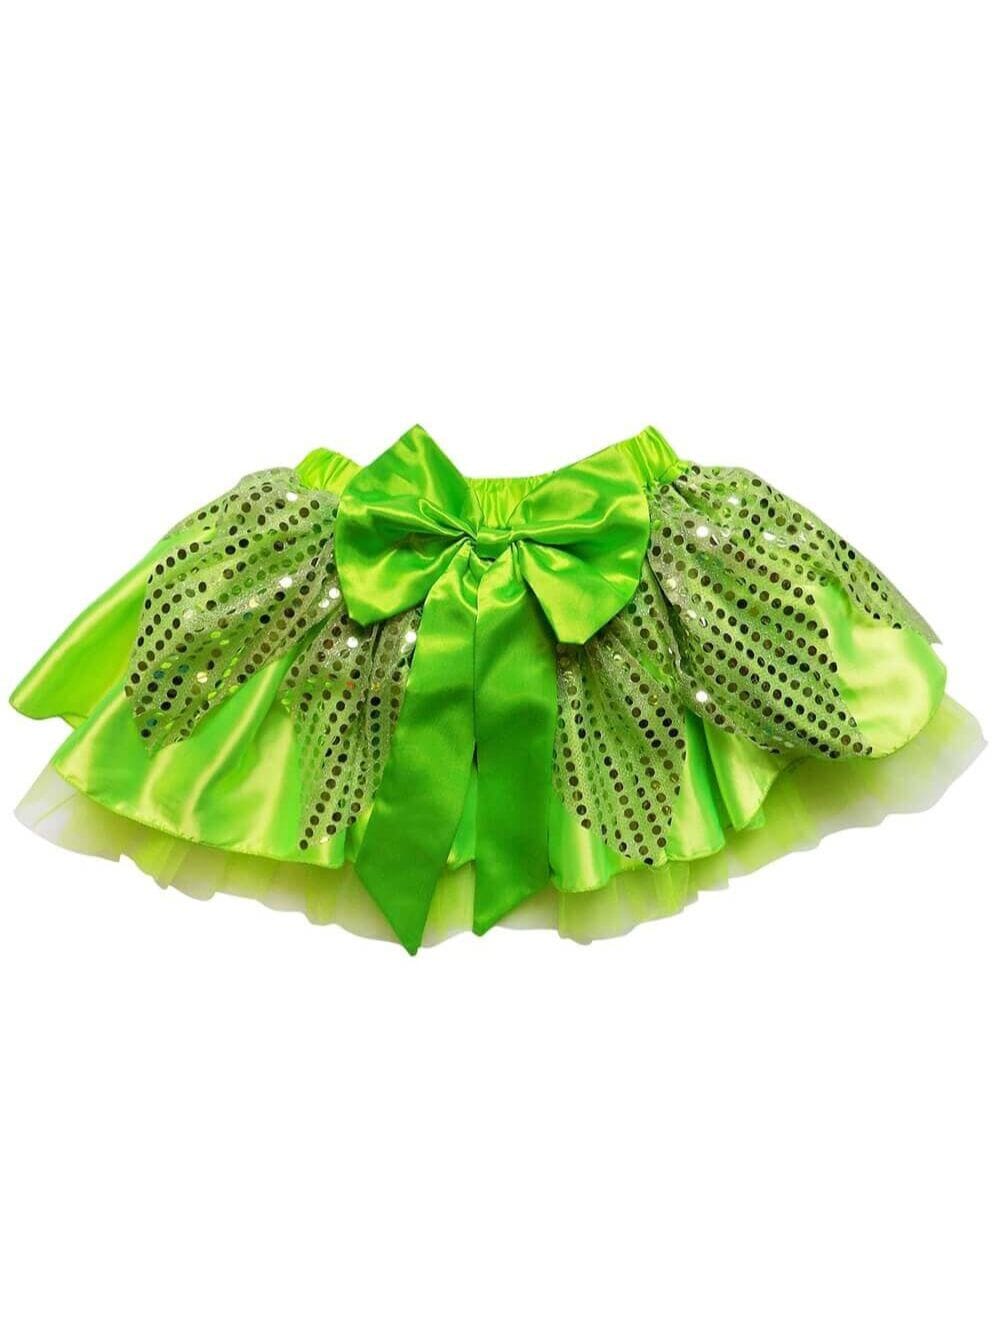 Green Fairy Princess Costume Tutu Skirt in Kids, Adult, or Plus Size - Sydney So Sweet